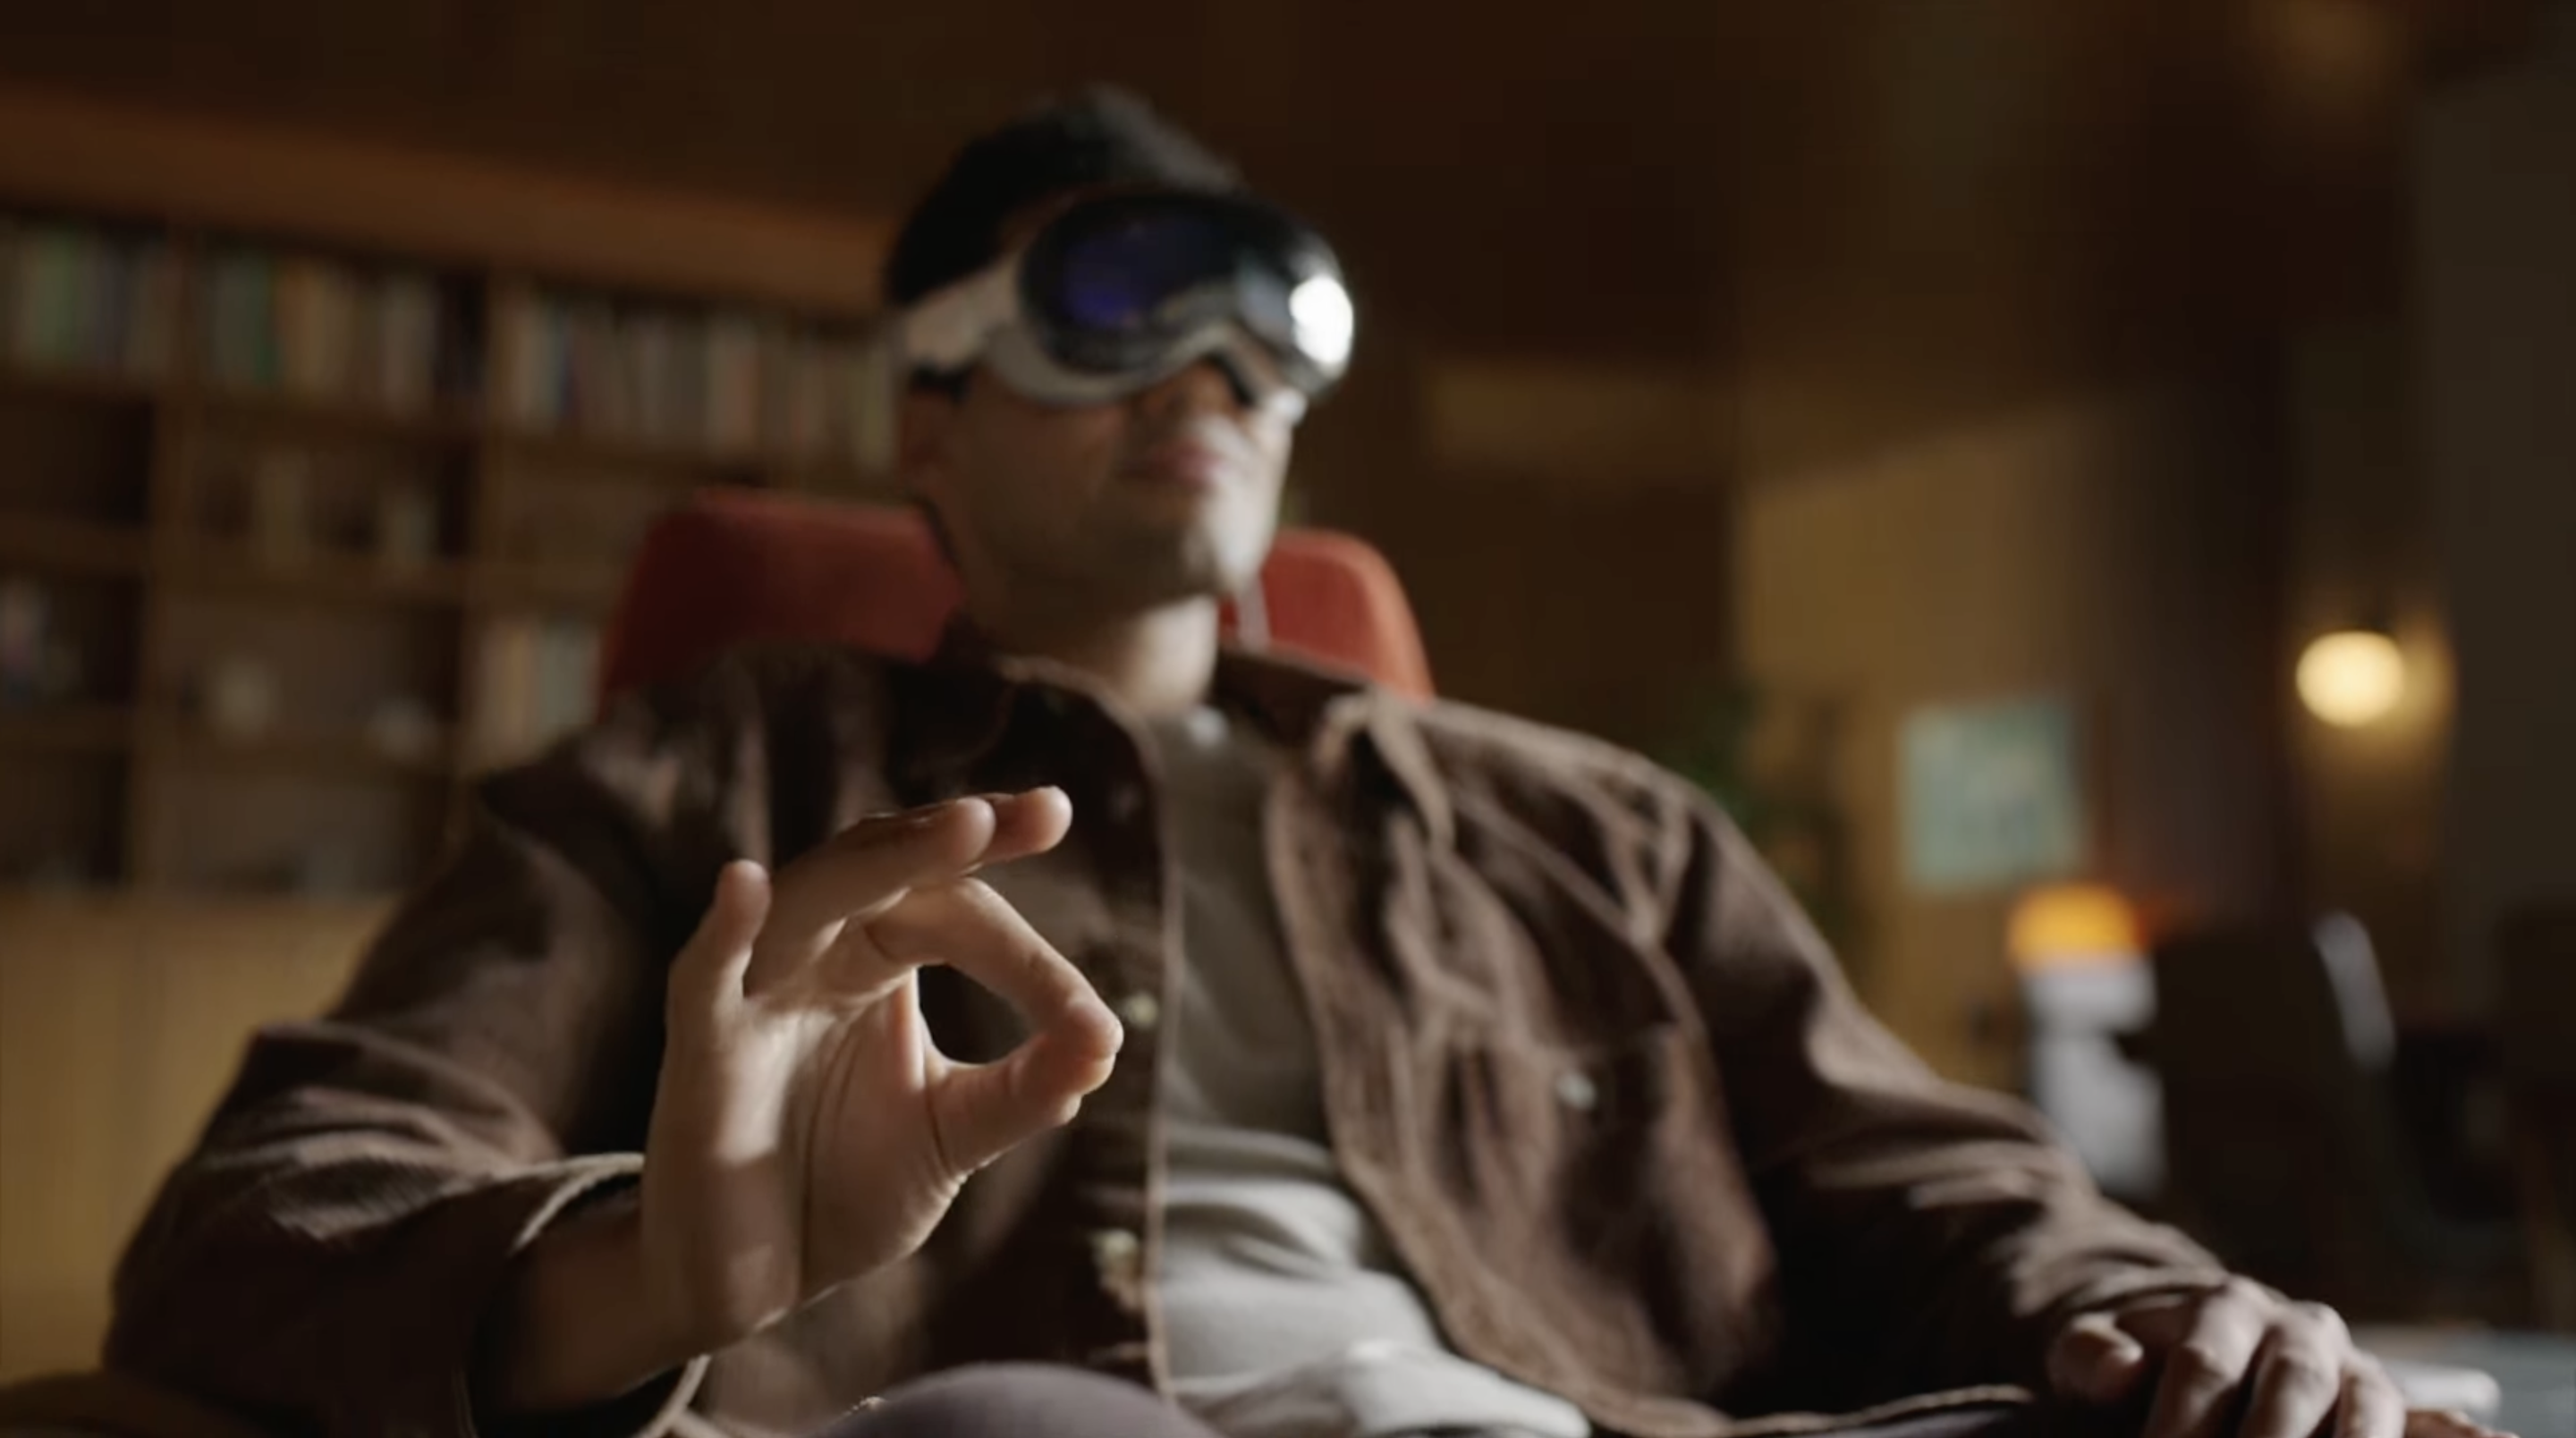 An Apple Vision Pro wearing making gestures with the hands to control virtual elements